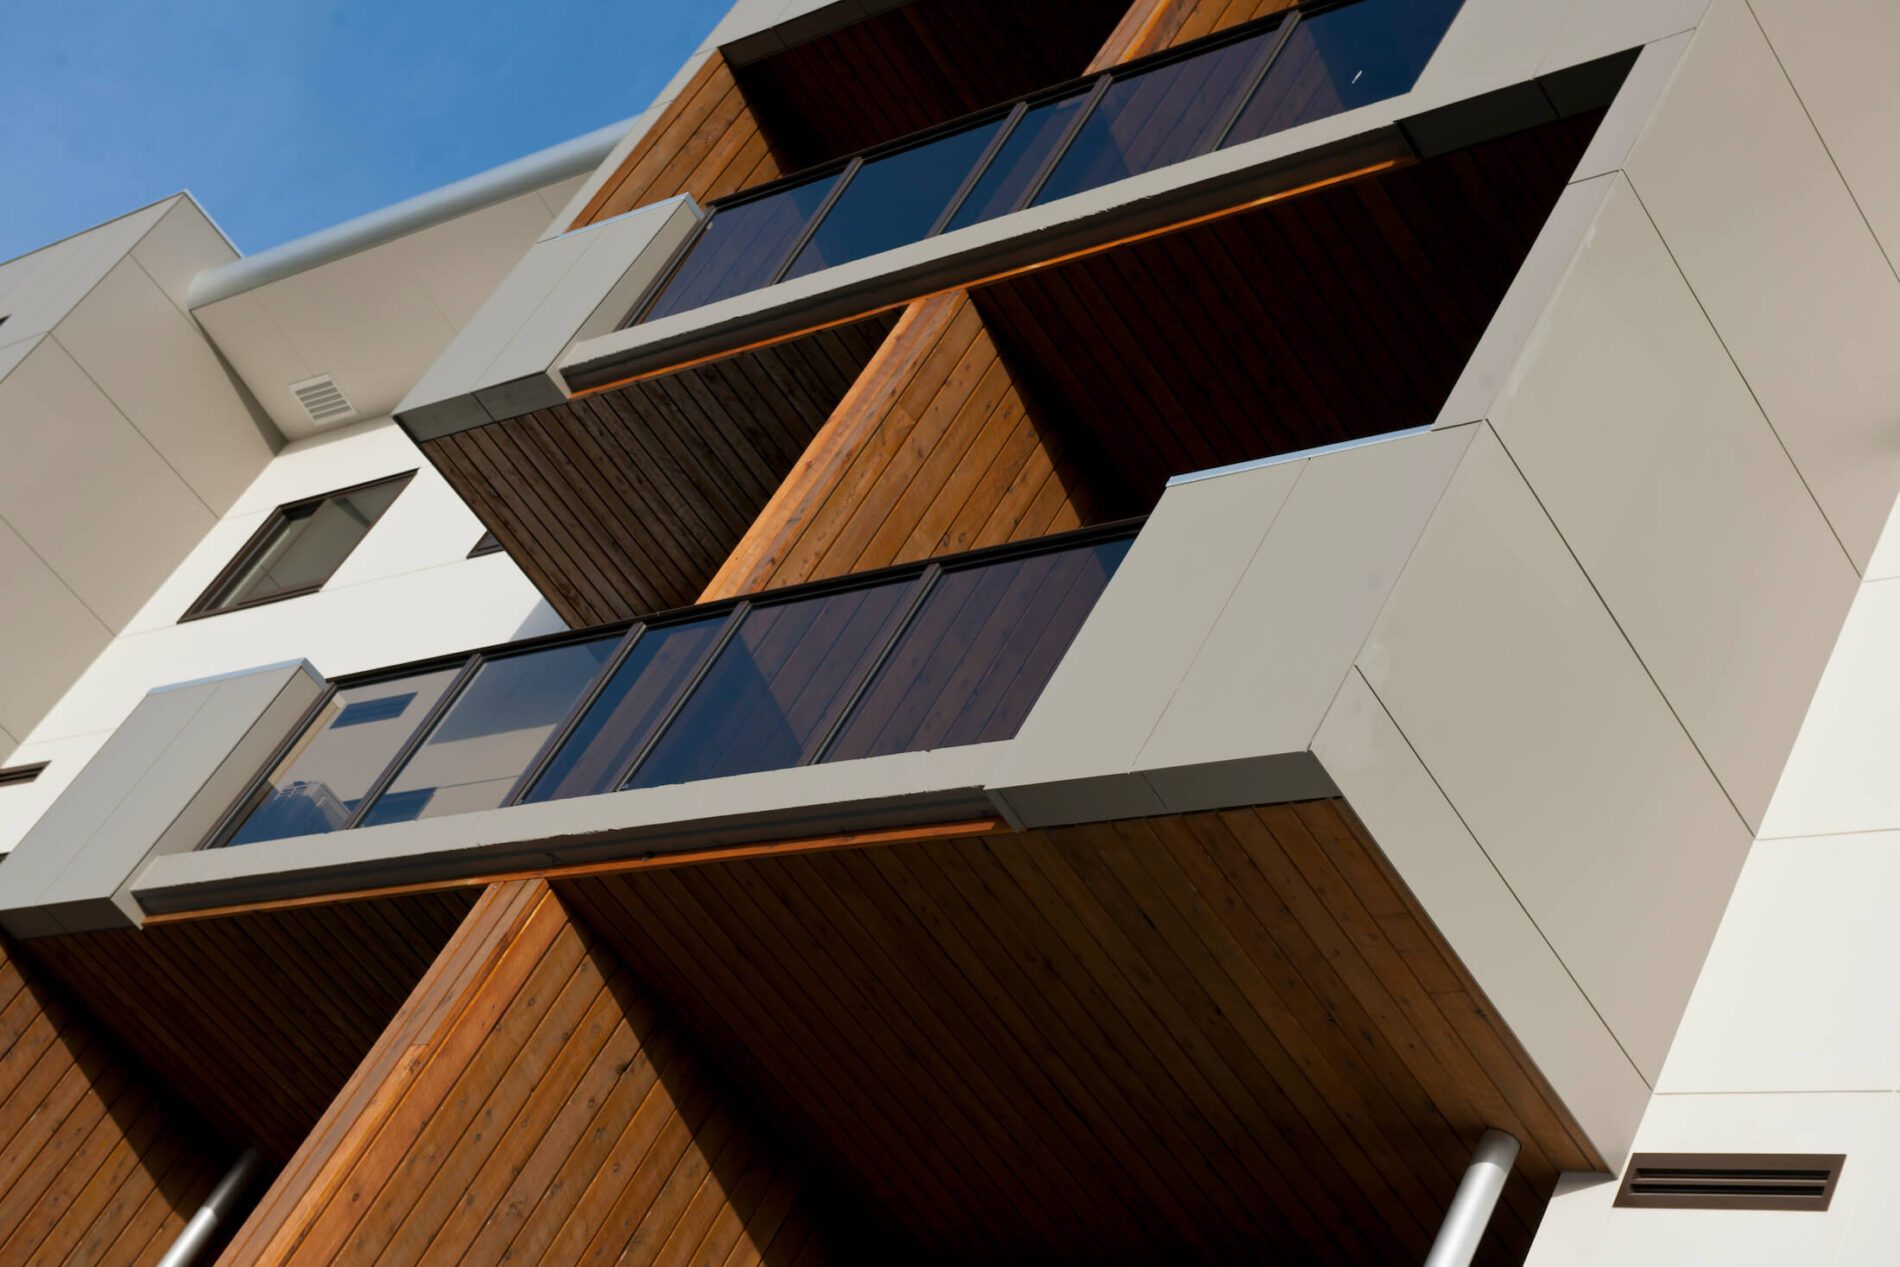 New apartment balconies with timber and fibre cement sheet cladding